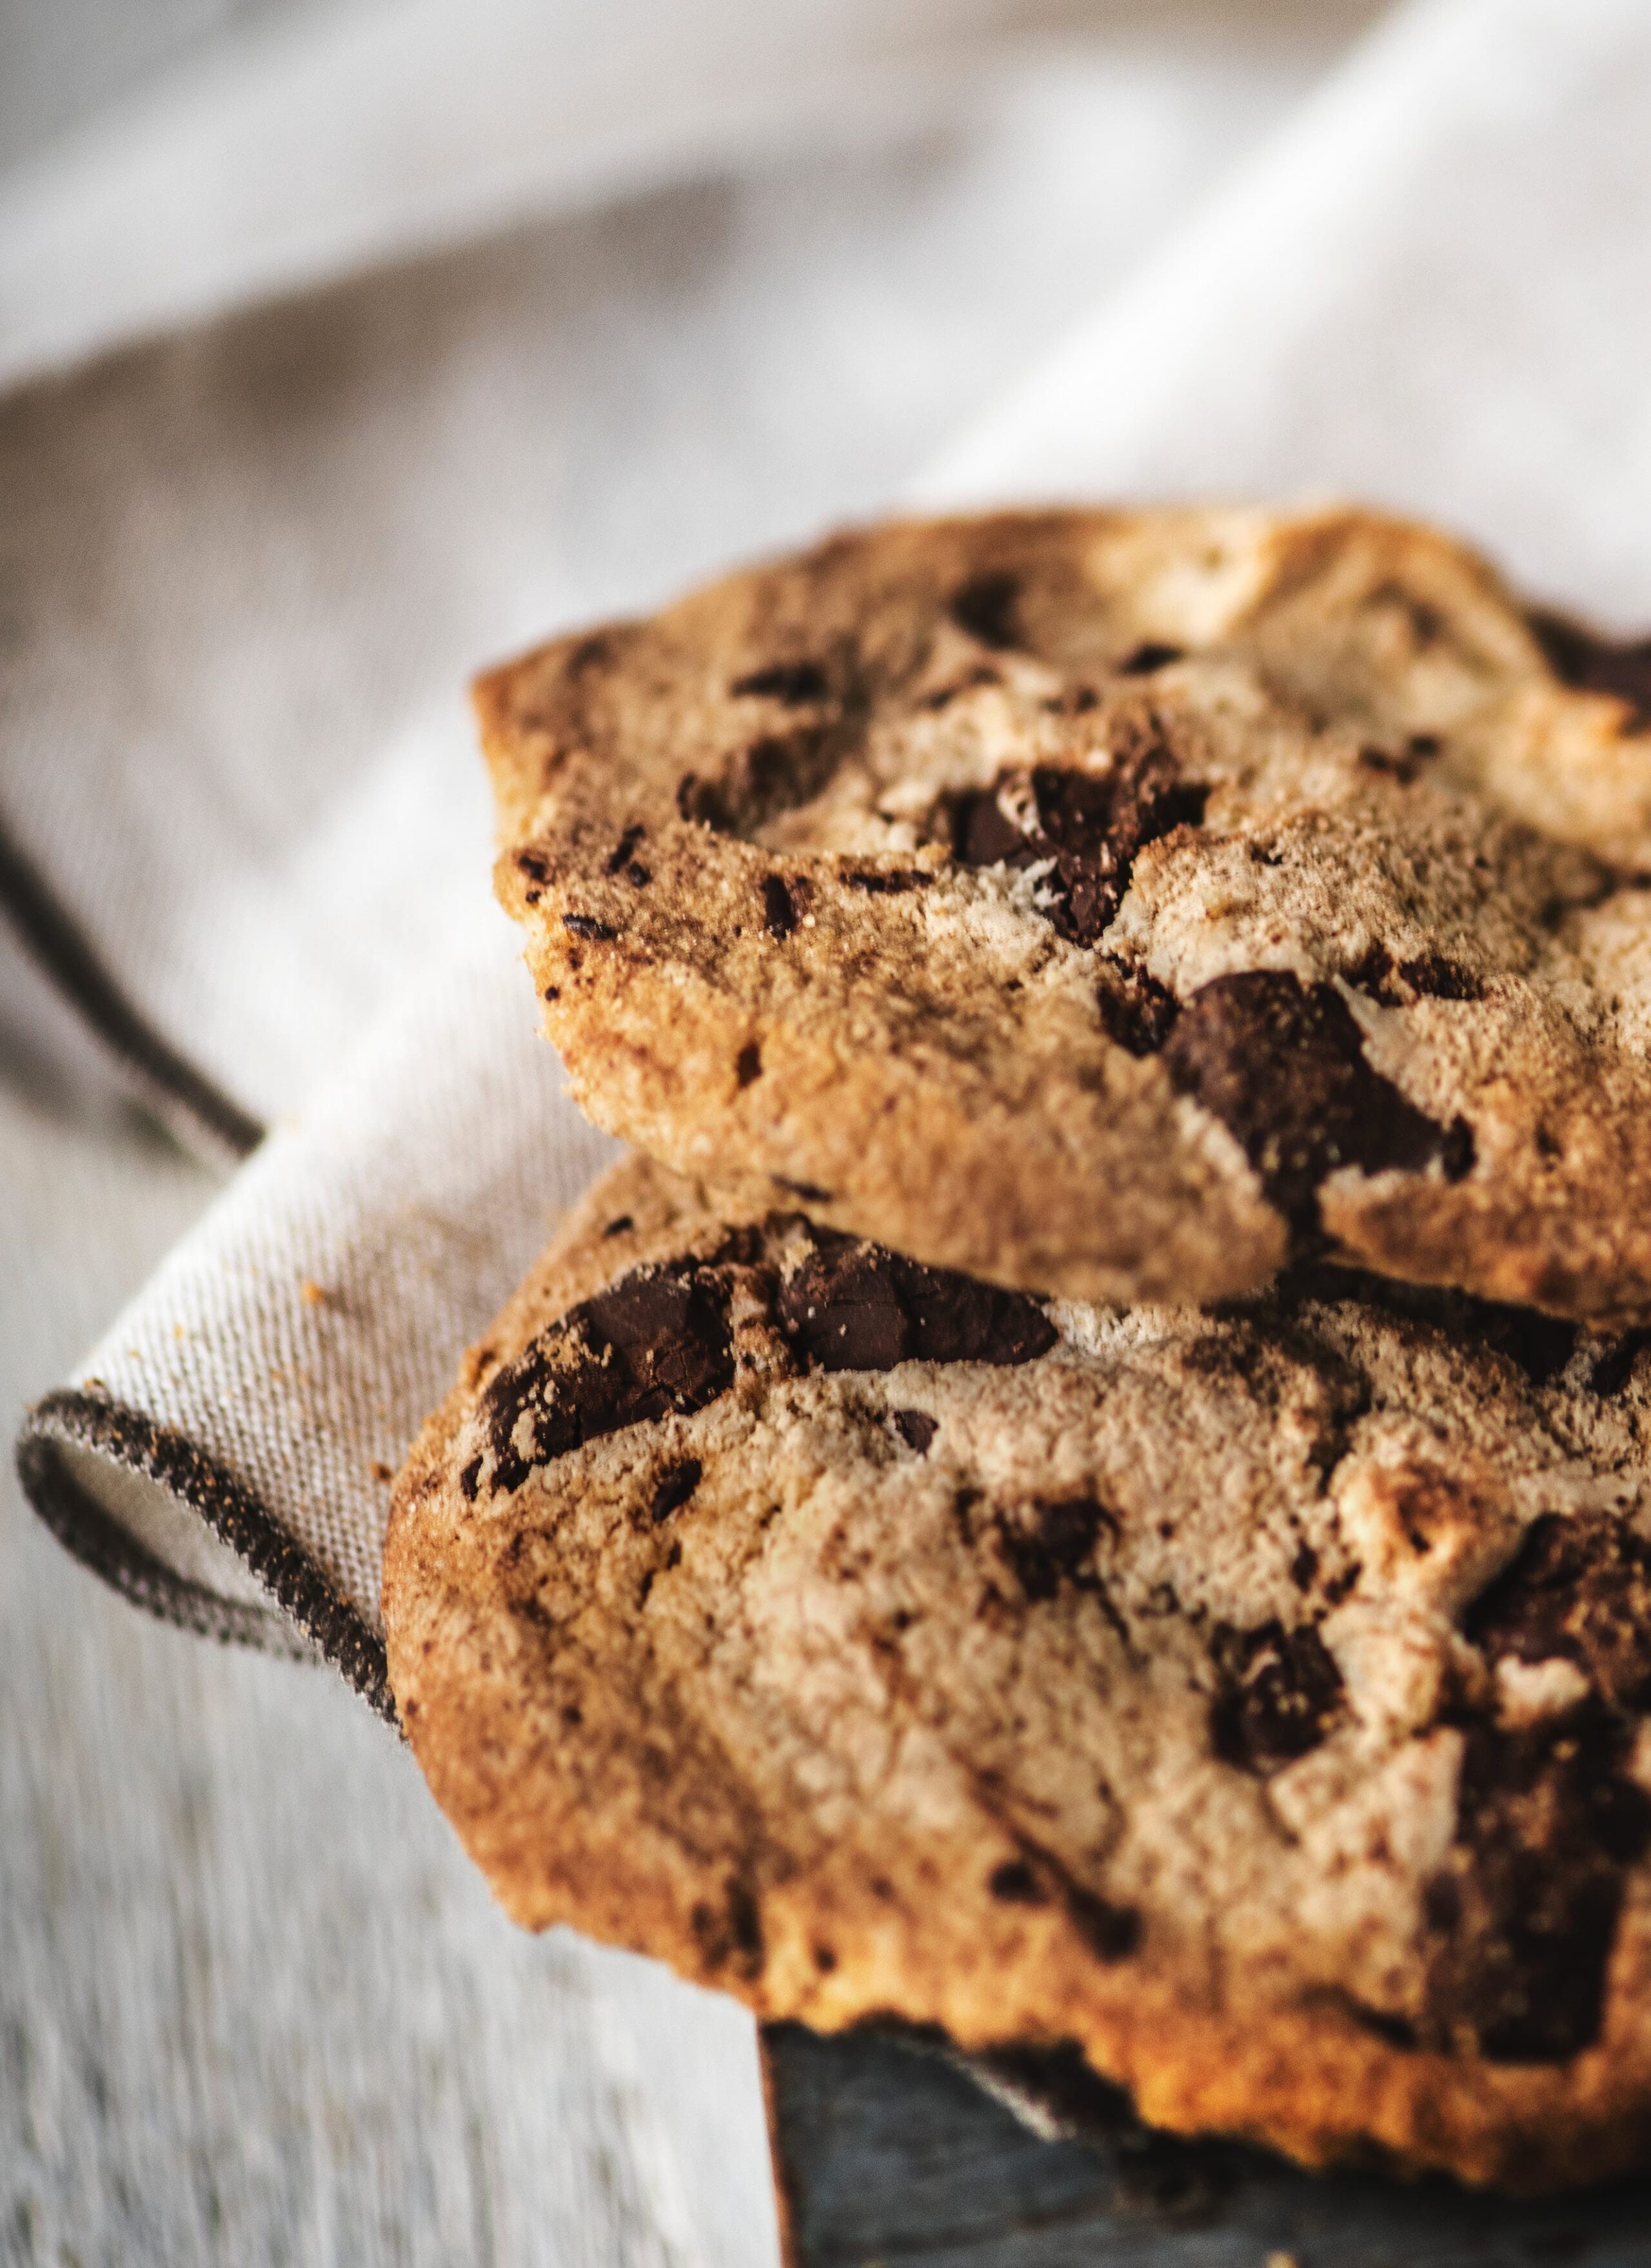 baked-brown-chocolate-chip-cookies-1282275-min